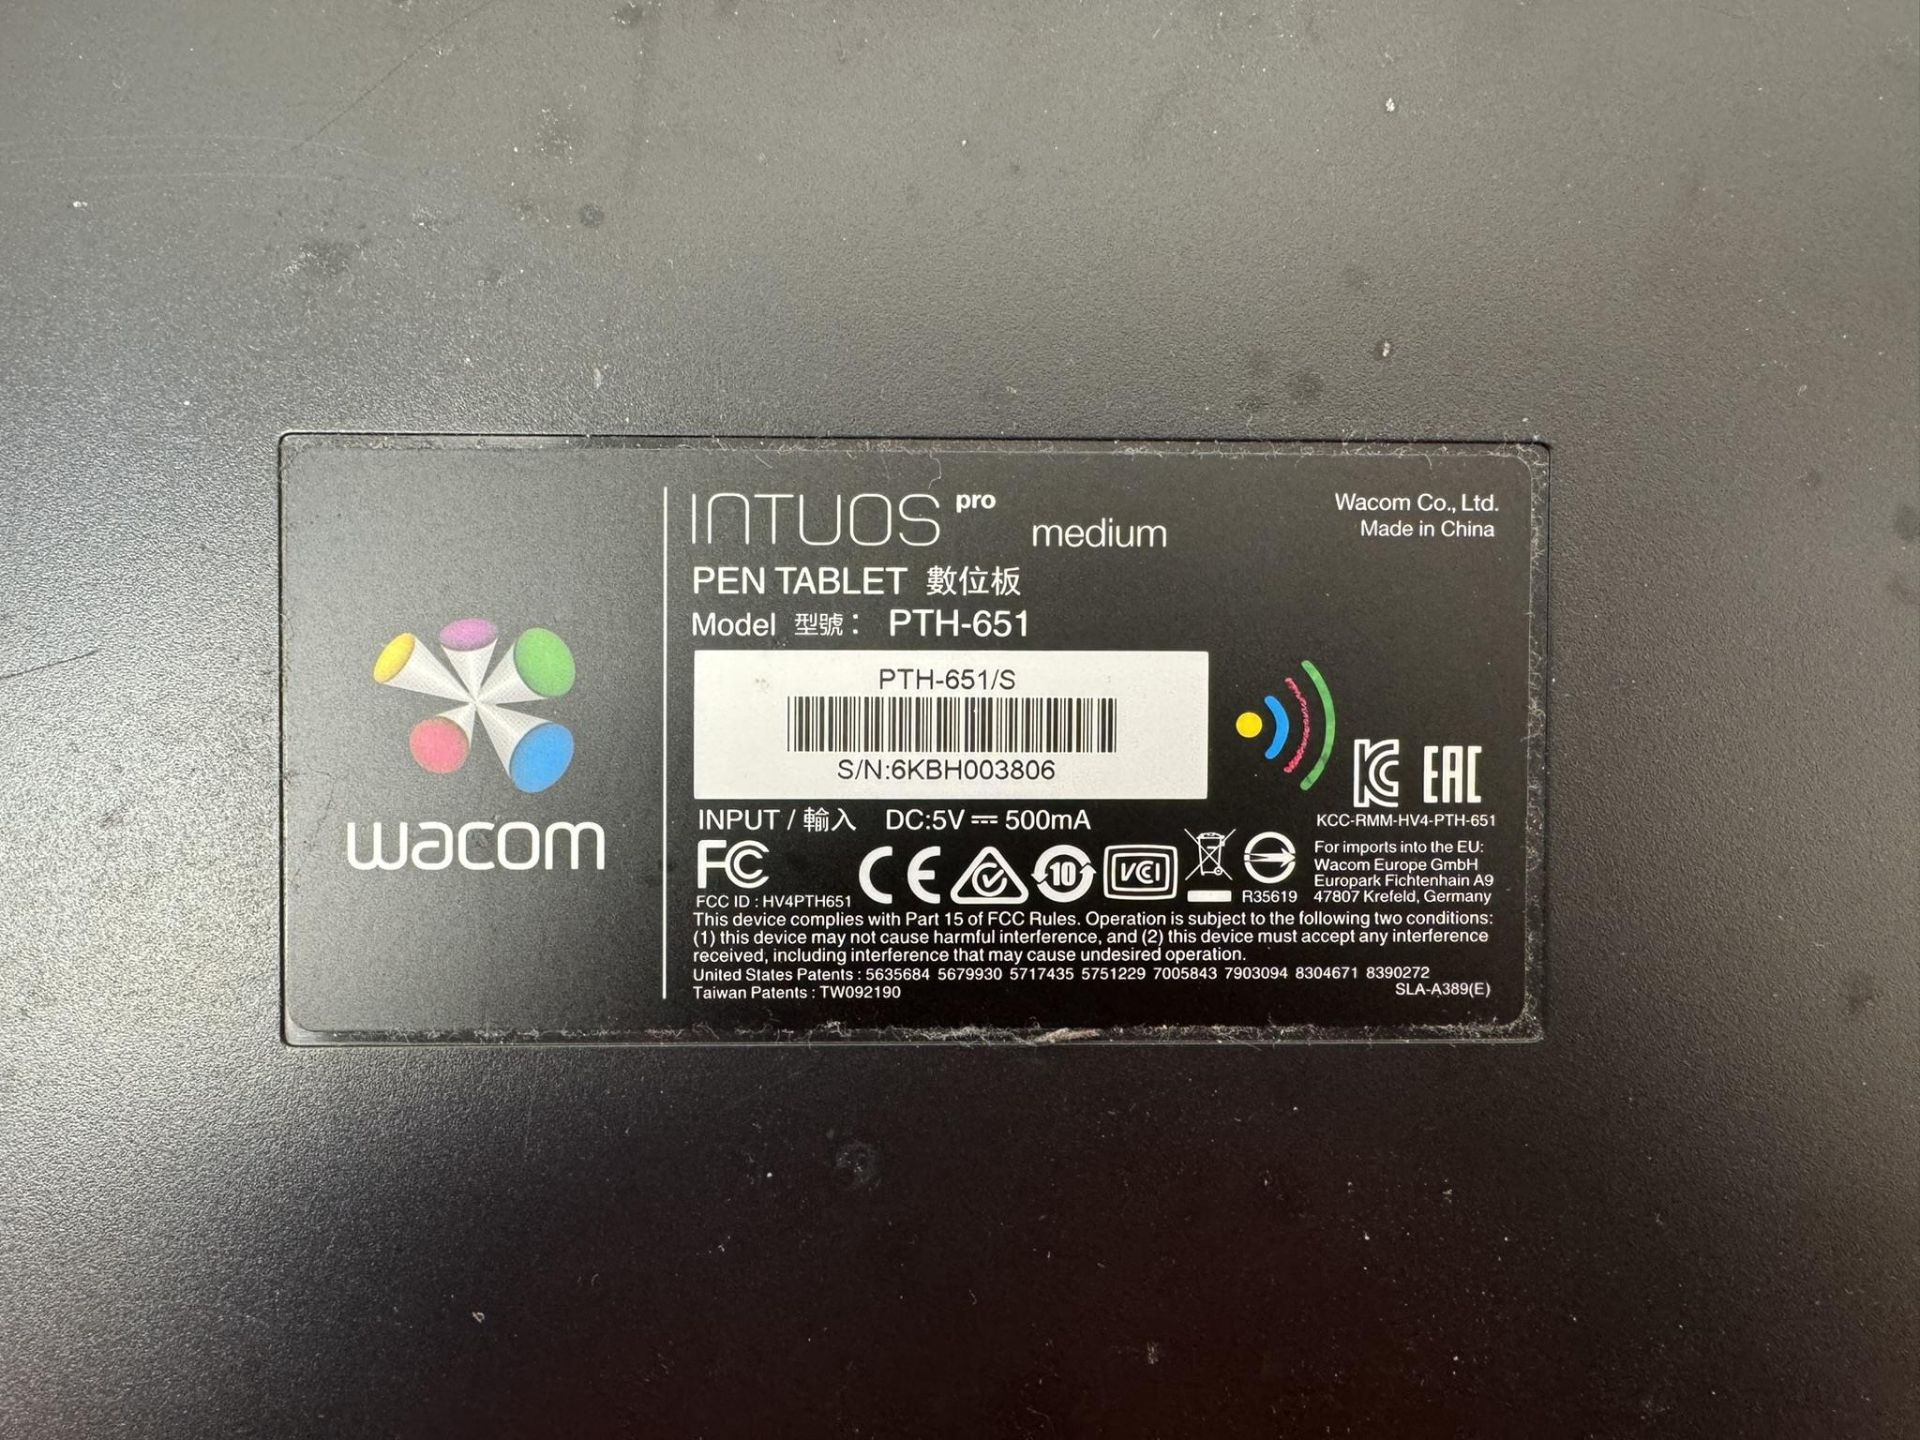 Wacom Intuos Pro Medium Pth651 Pen and Touch Tablet Without Pen - Image 2 of 2